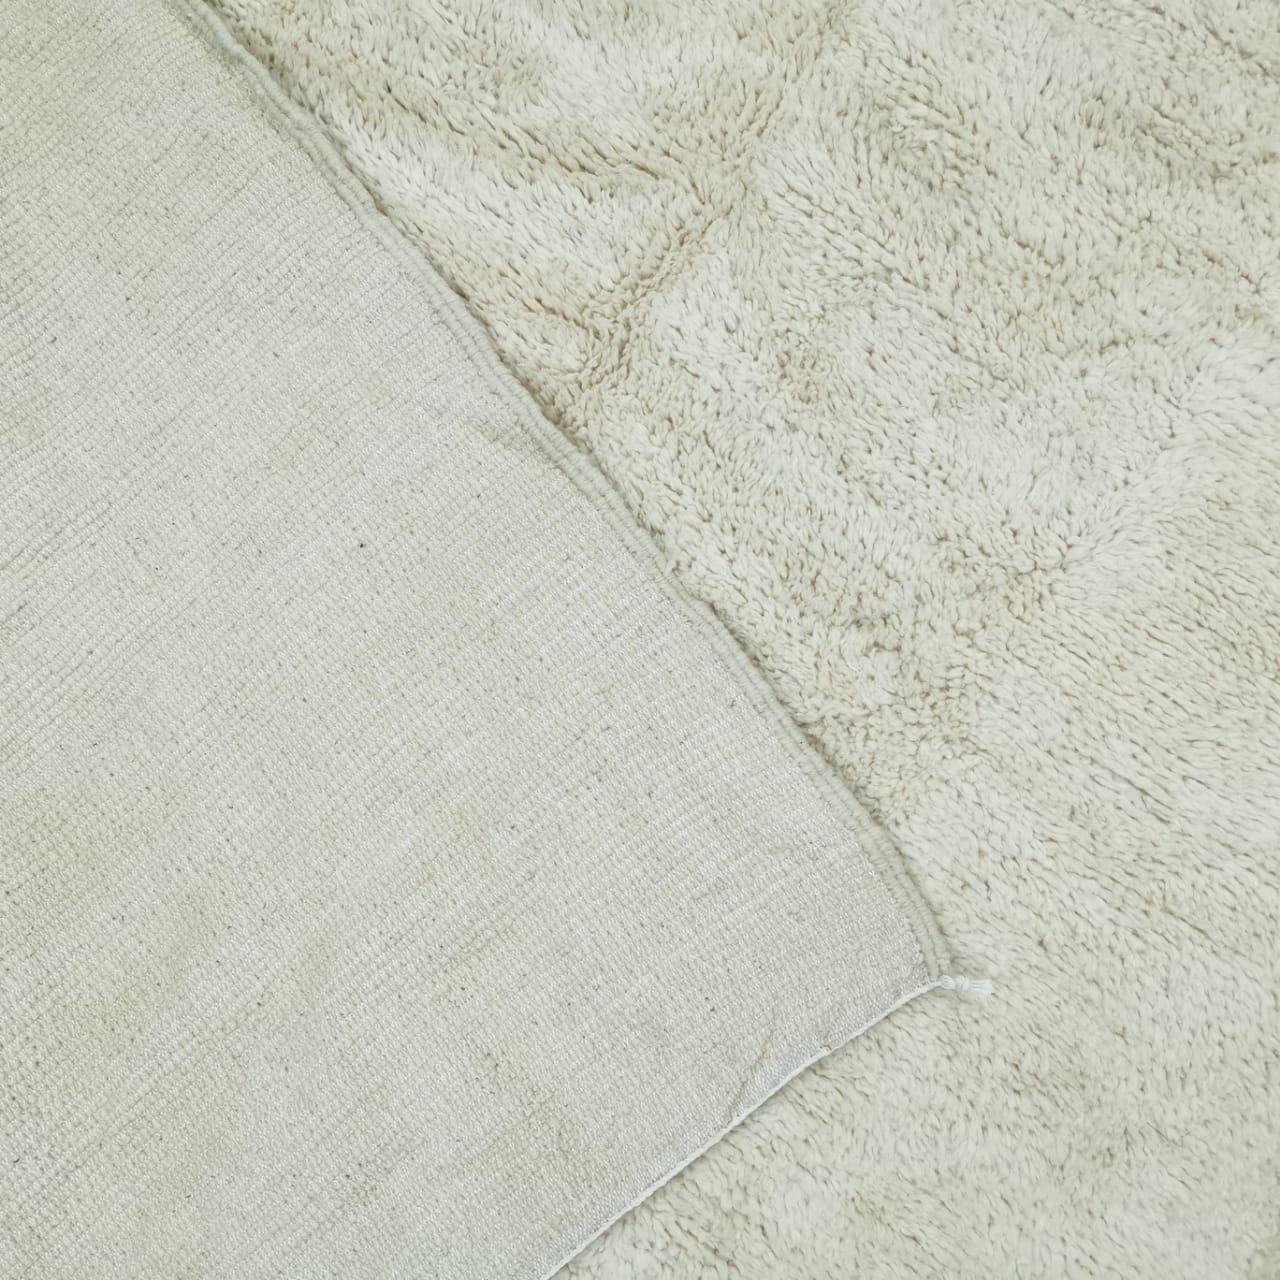 Beni Ourain - Handwoven with Genuine Lamb Wool